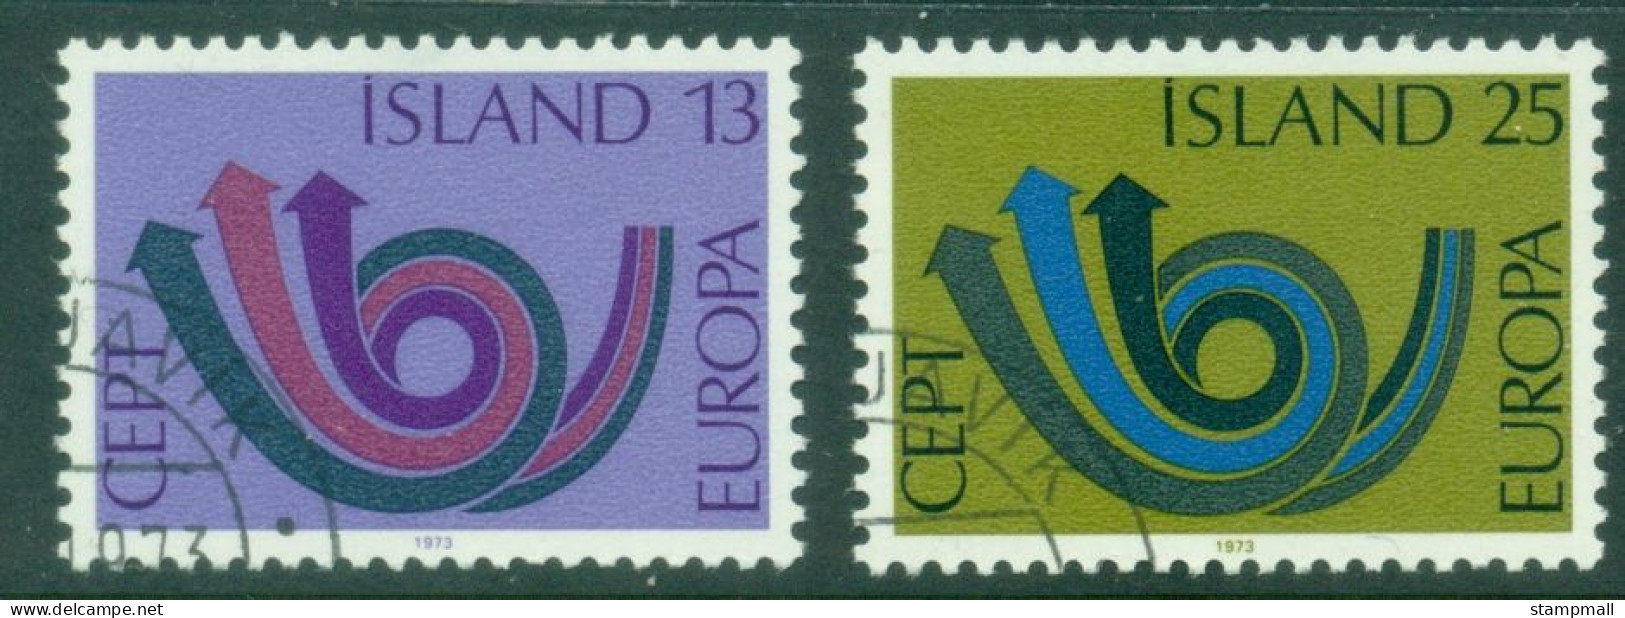 Iceland 1973 Europa CTO - Used Stamps